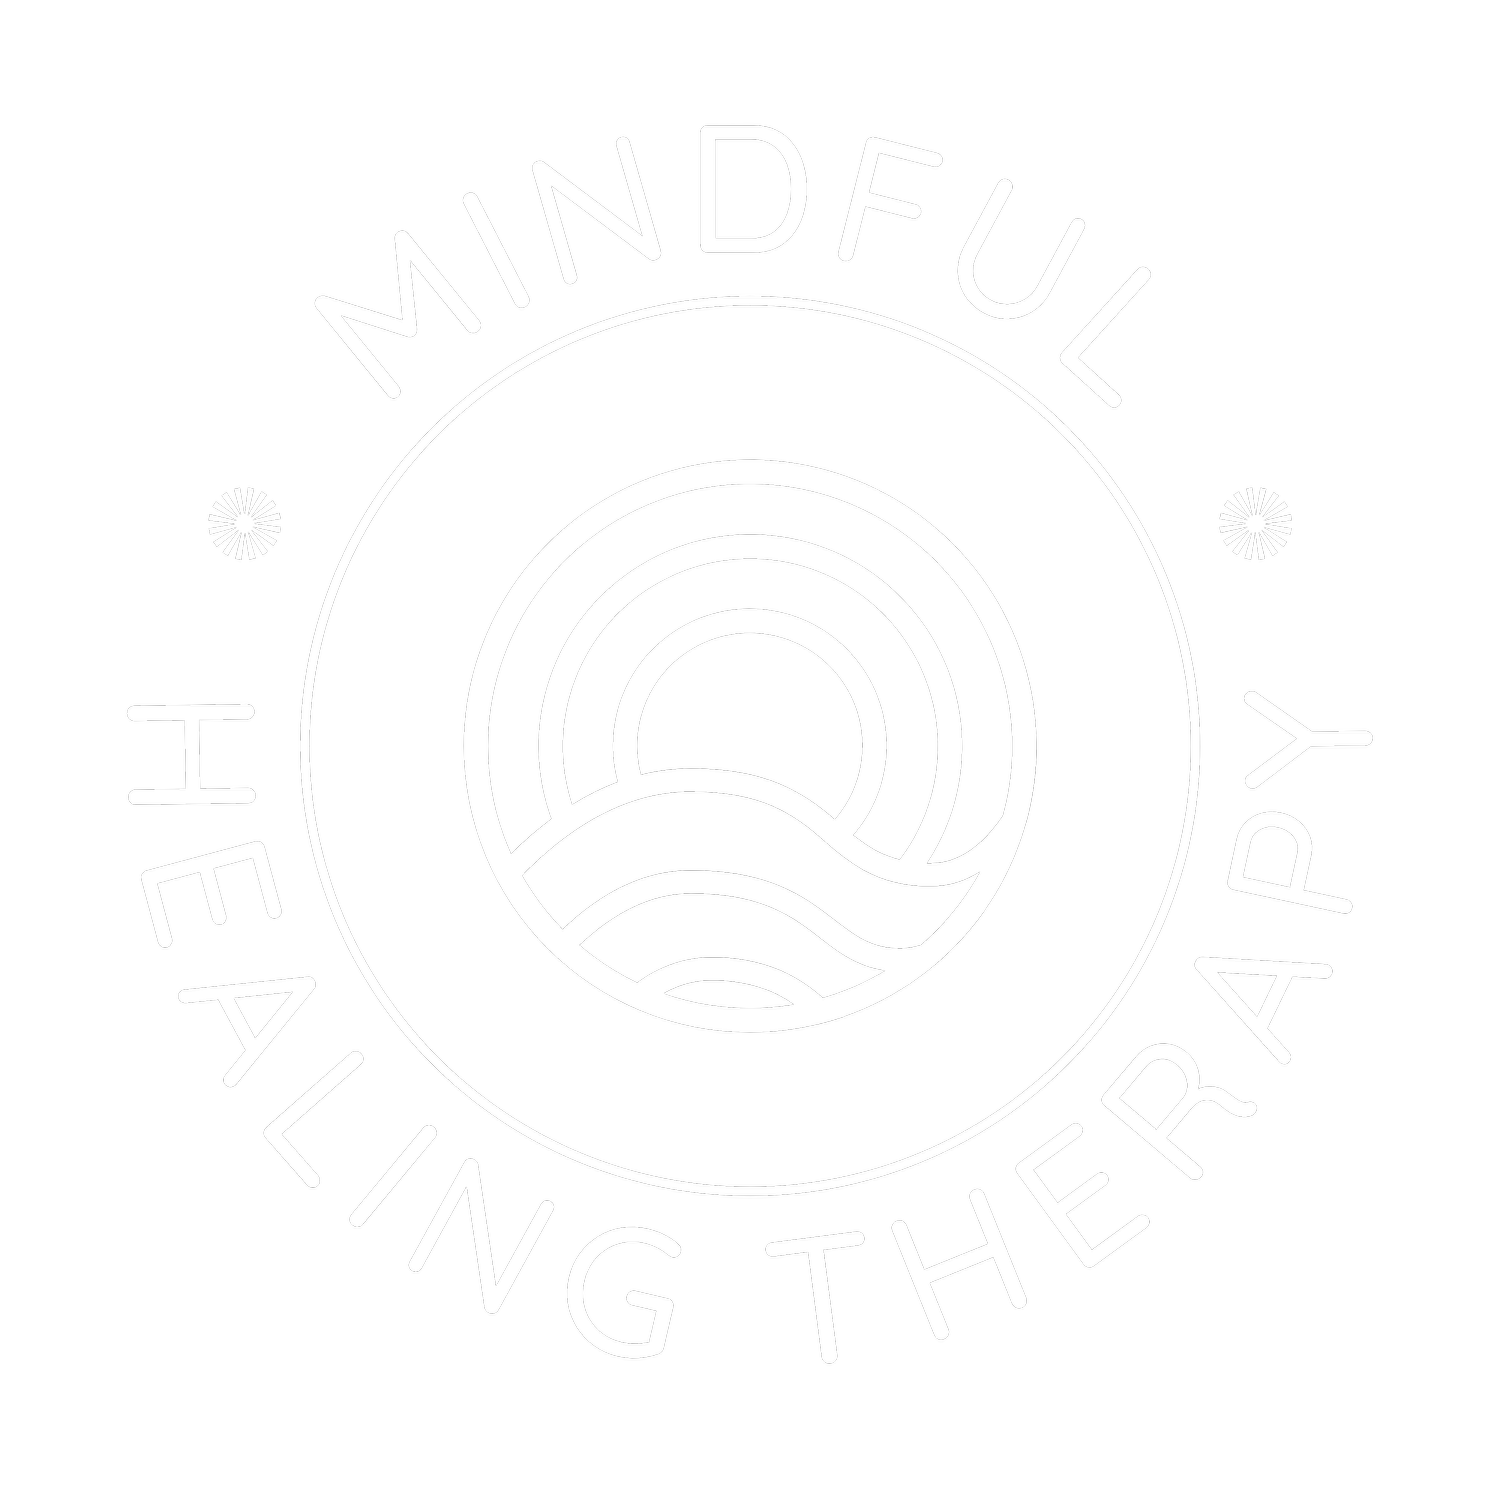 Mindful Healing Therapy LLC